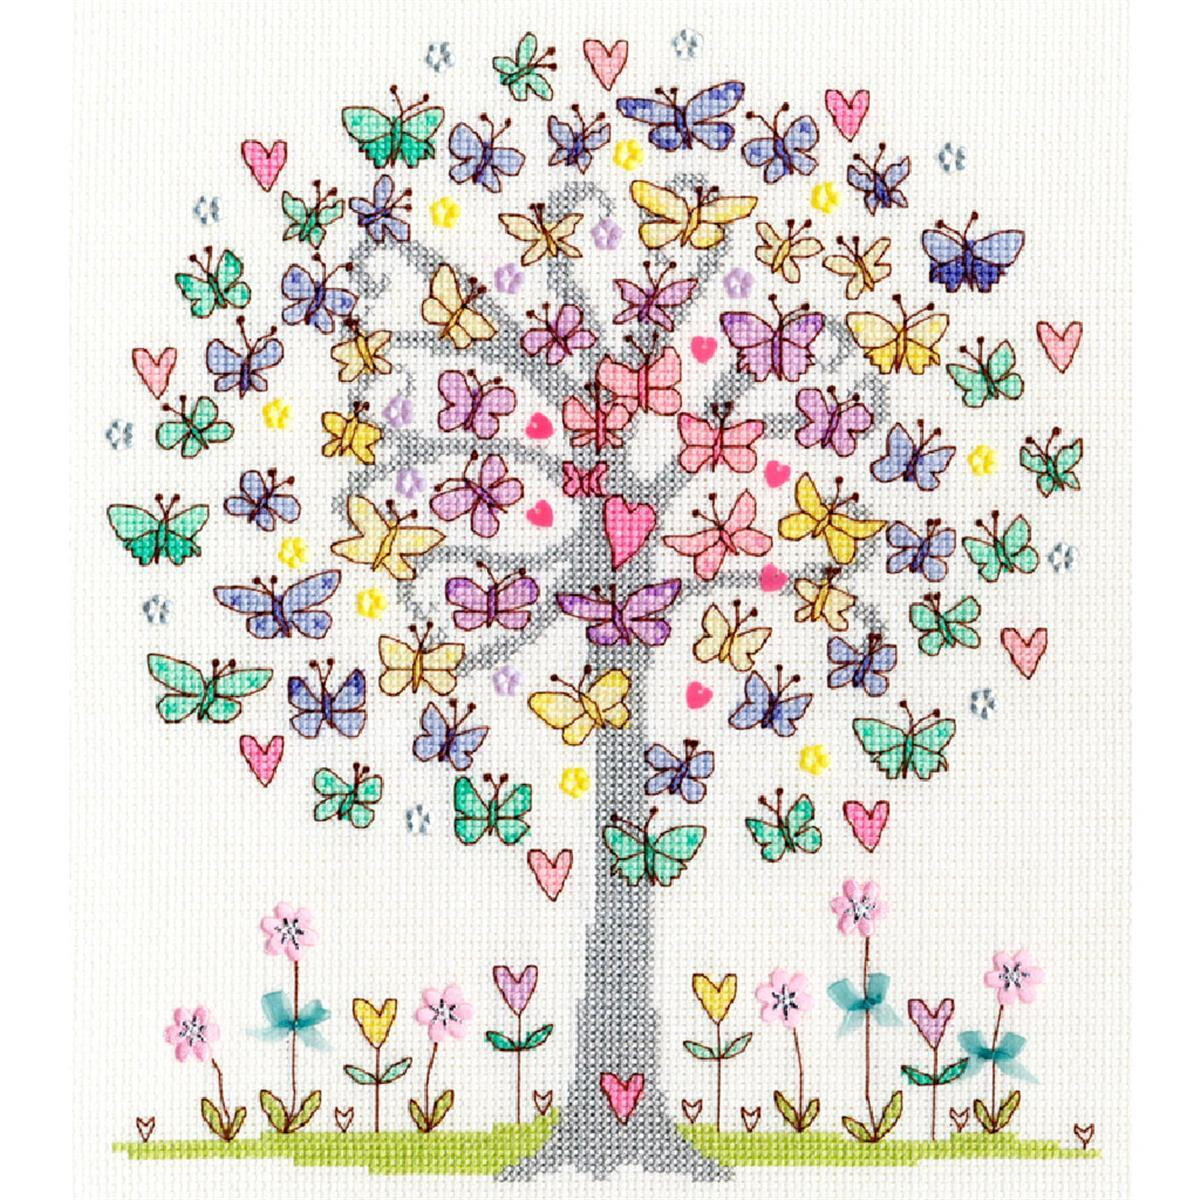 An embroidery pack or embroidery picture of a tree with a...